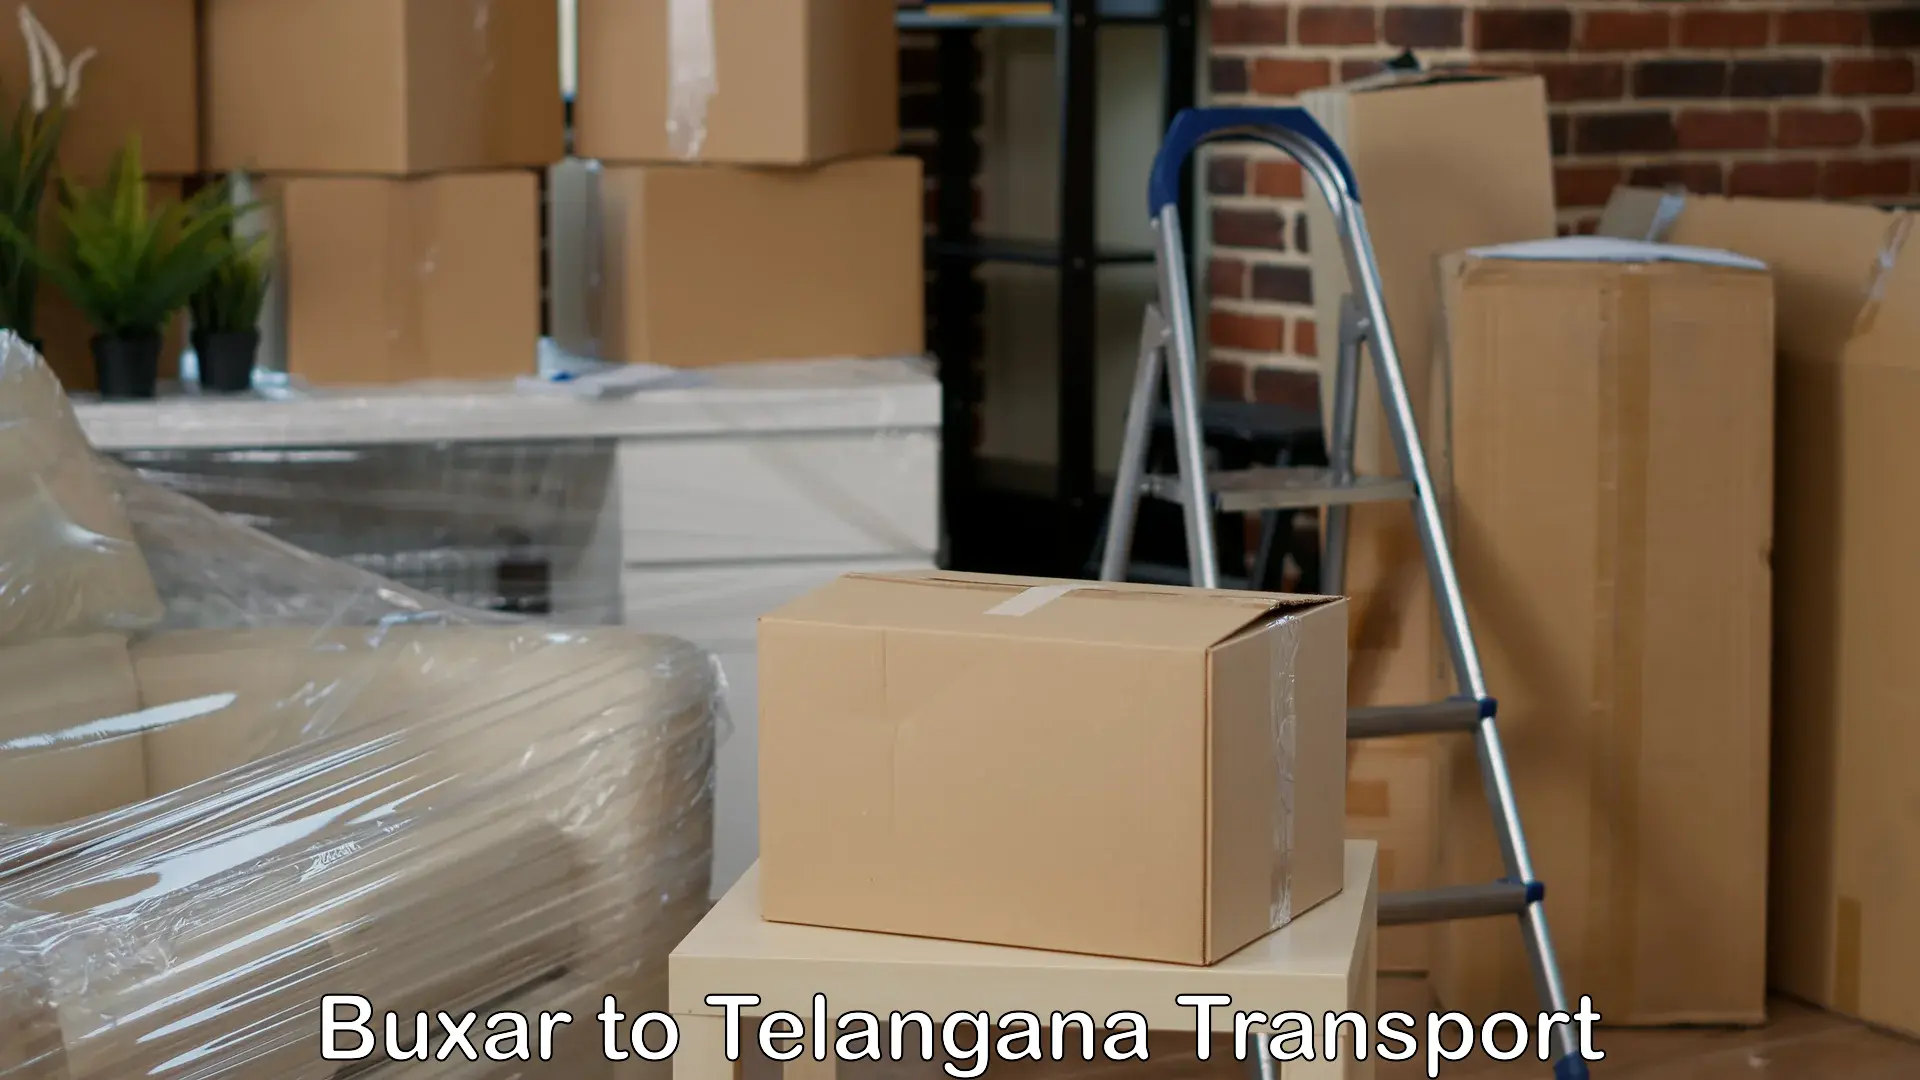 Container transportation services in Buxar to Warangal